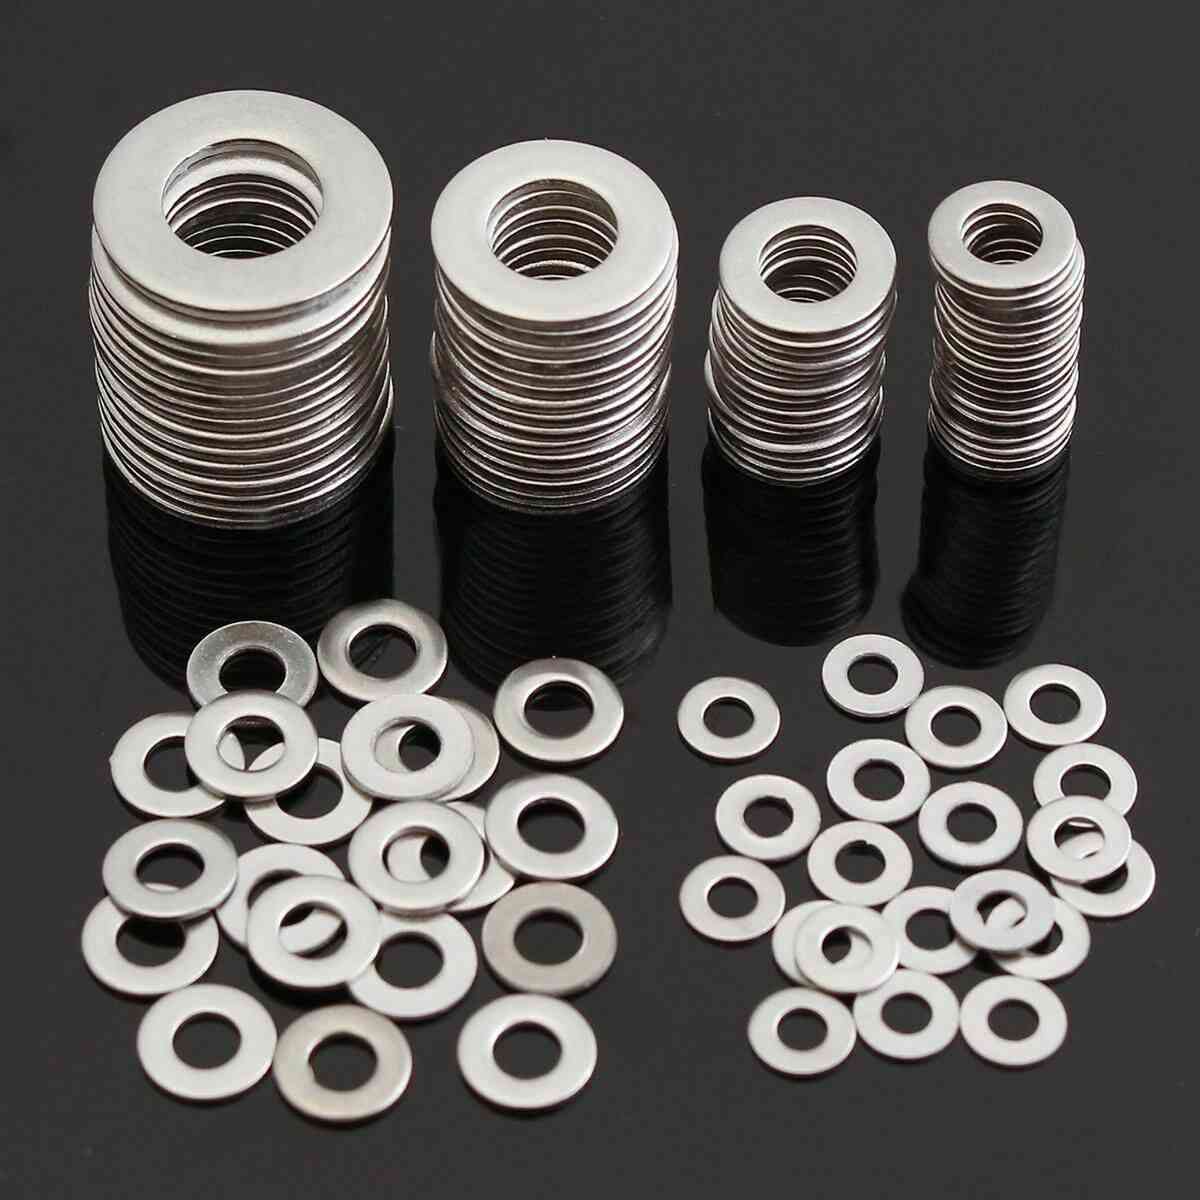 304 Stainless Steel Assorted Metric Flat Washer Tool